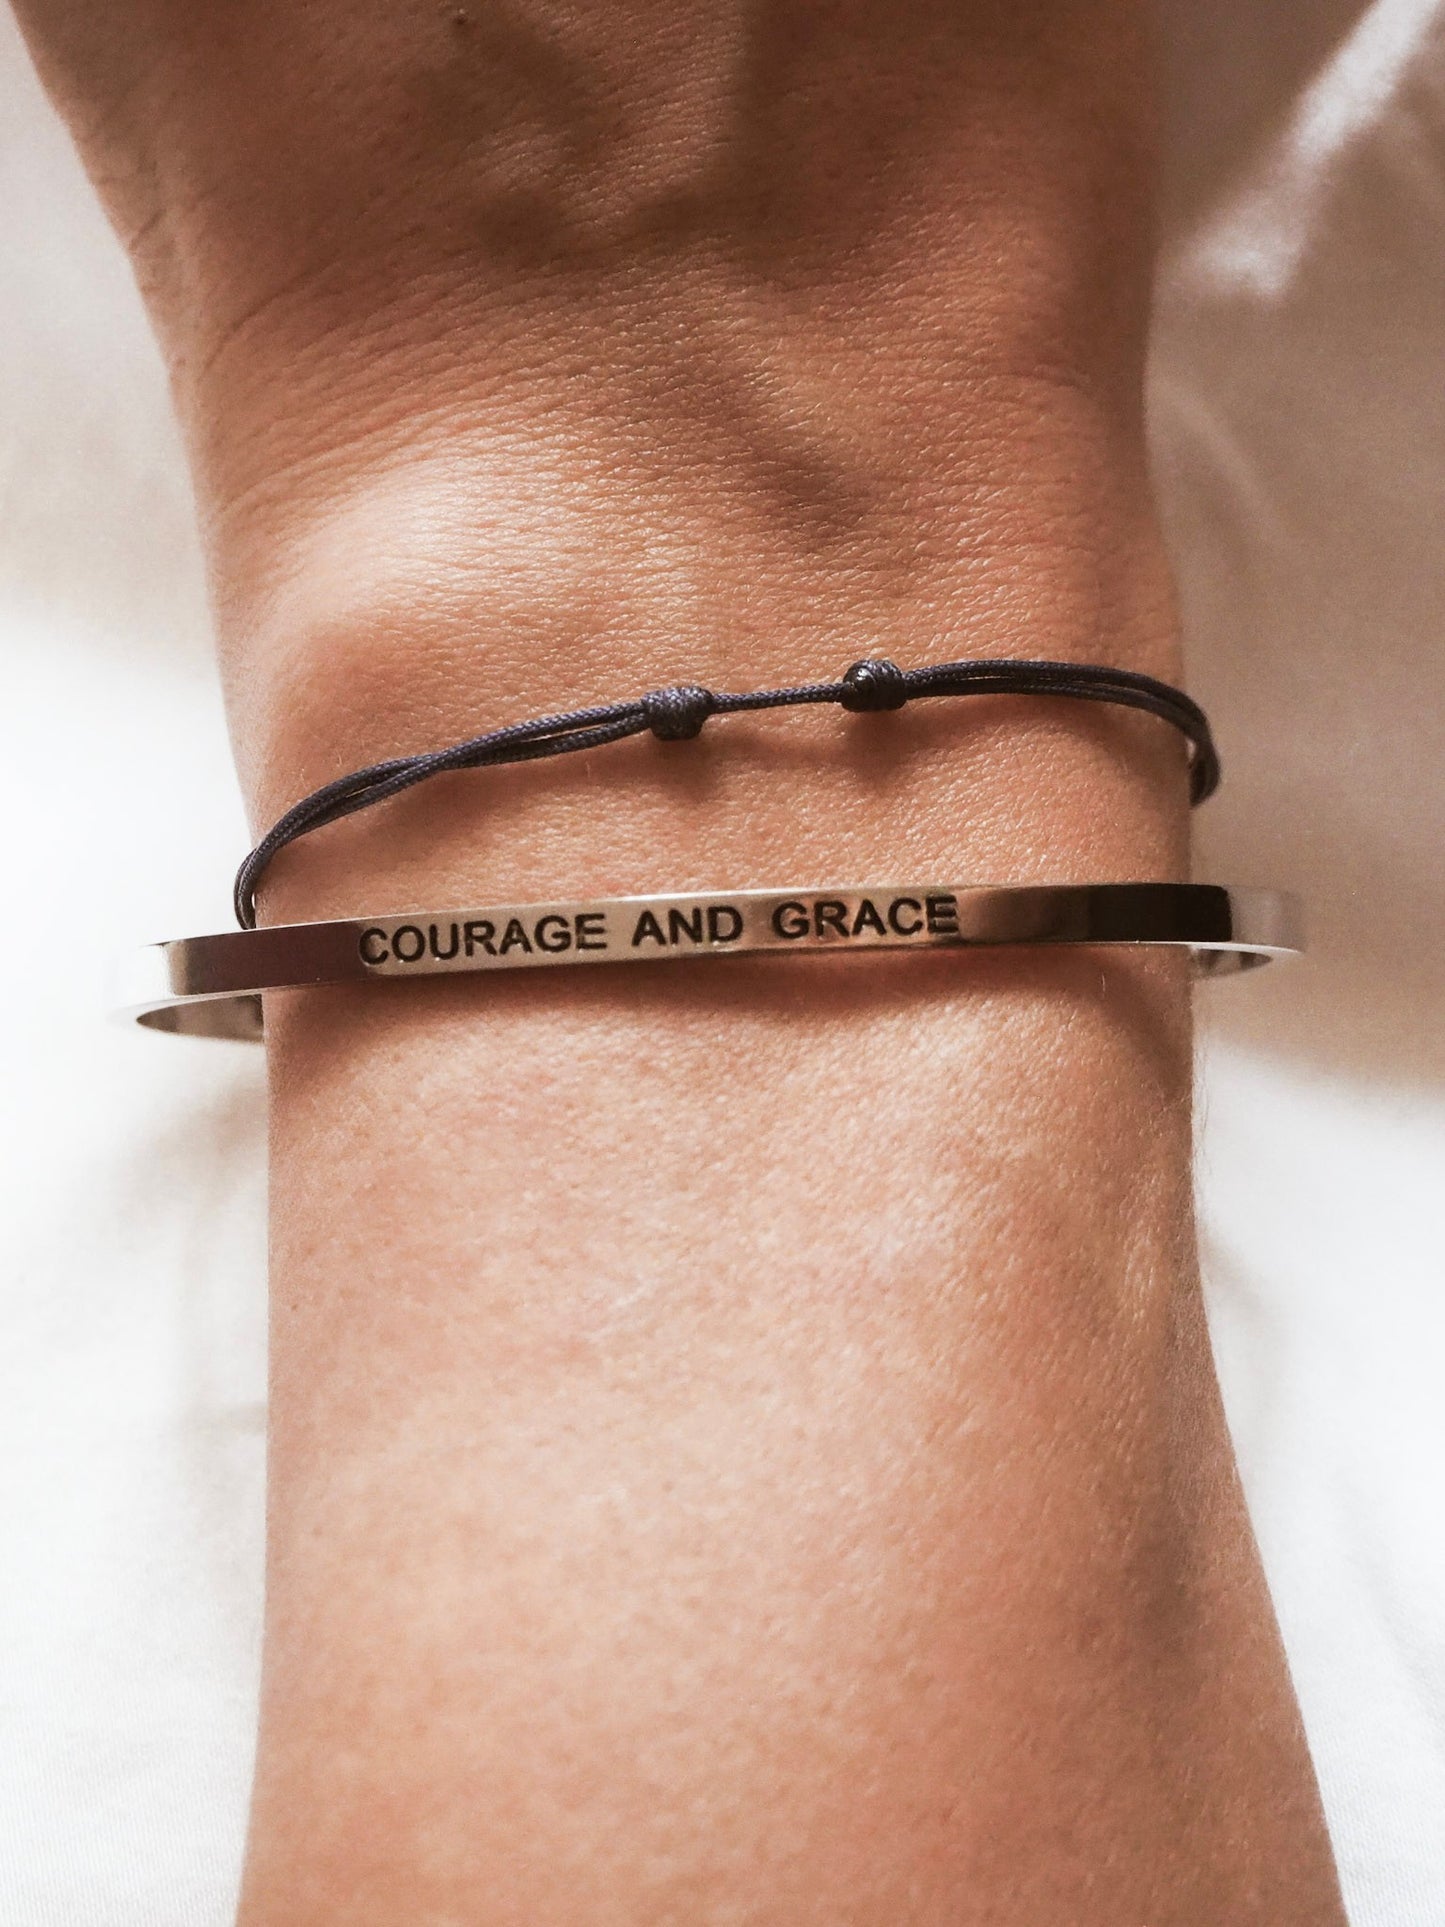 COURAGE AND GRACE | Bracelet in silver